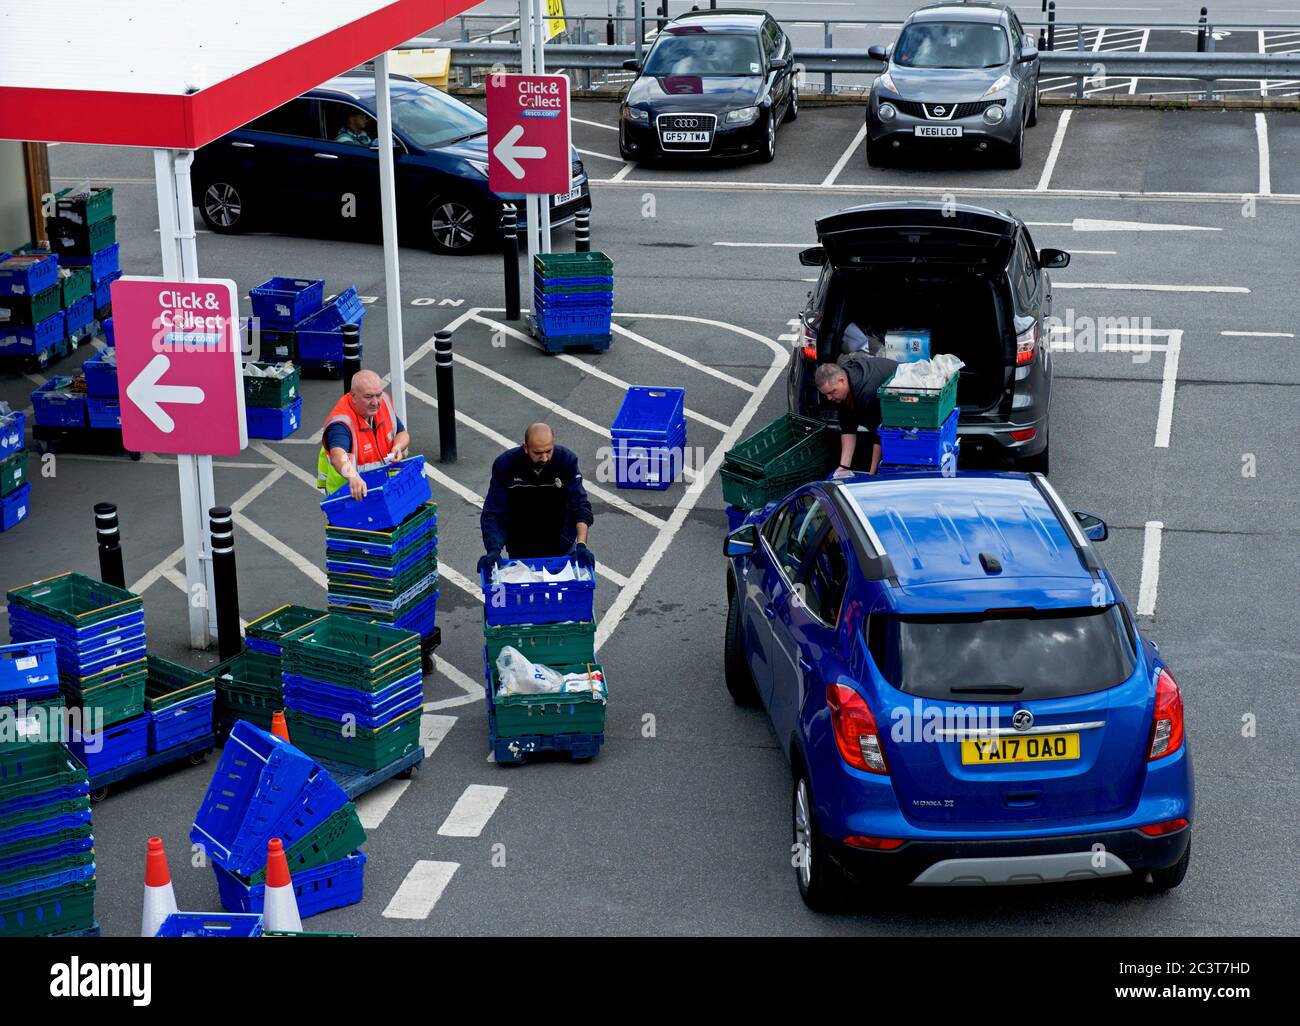 Customers at Click & Collect point, Tesco store in Batley, West Yorkshire, England UK Stock Photo